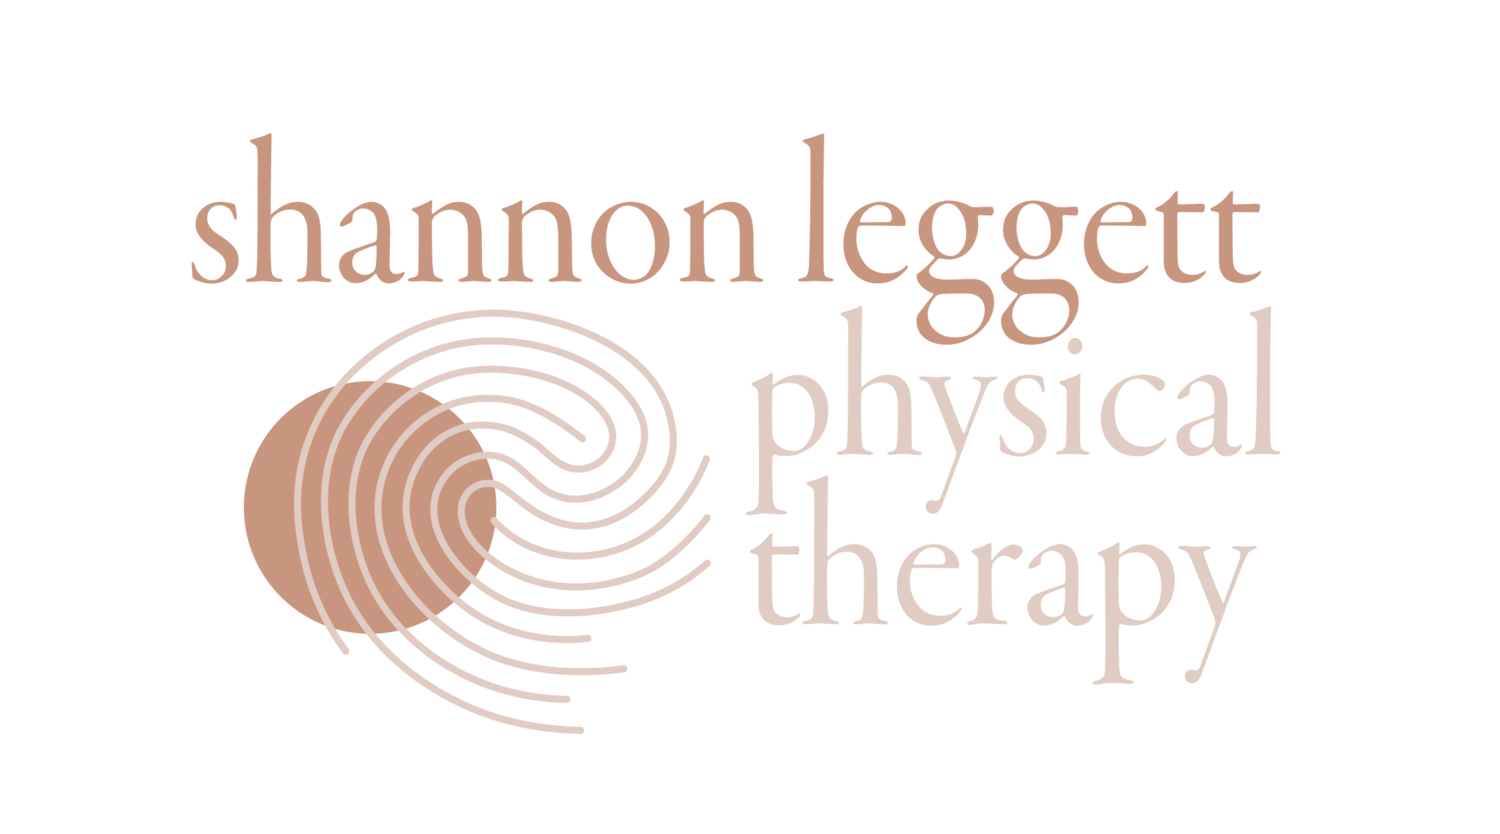 Shannon Leggett Physical Therapy